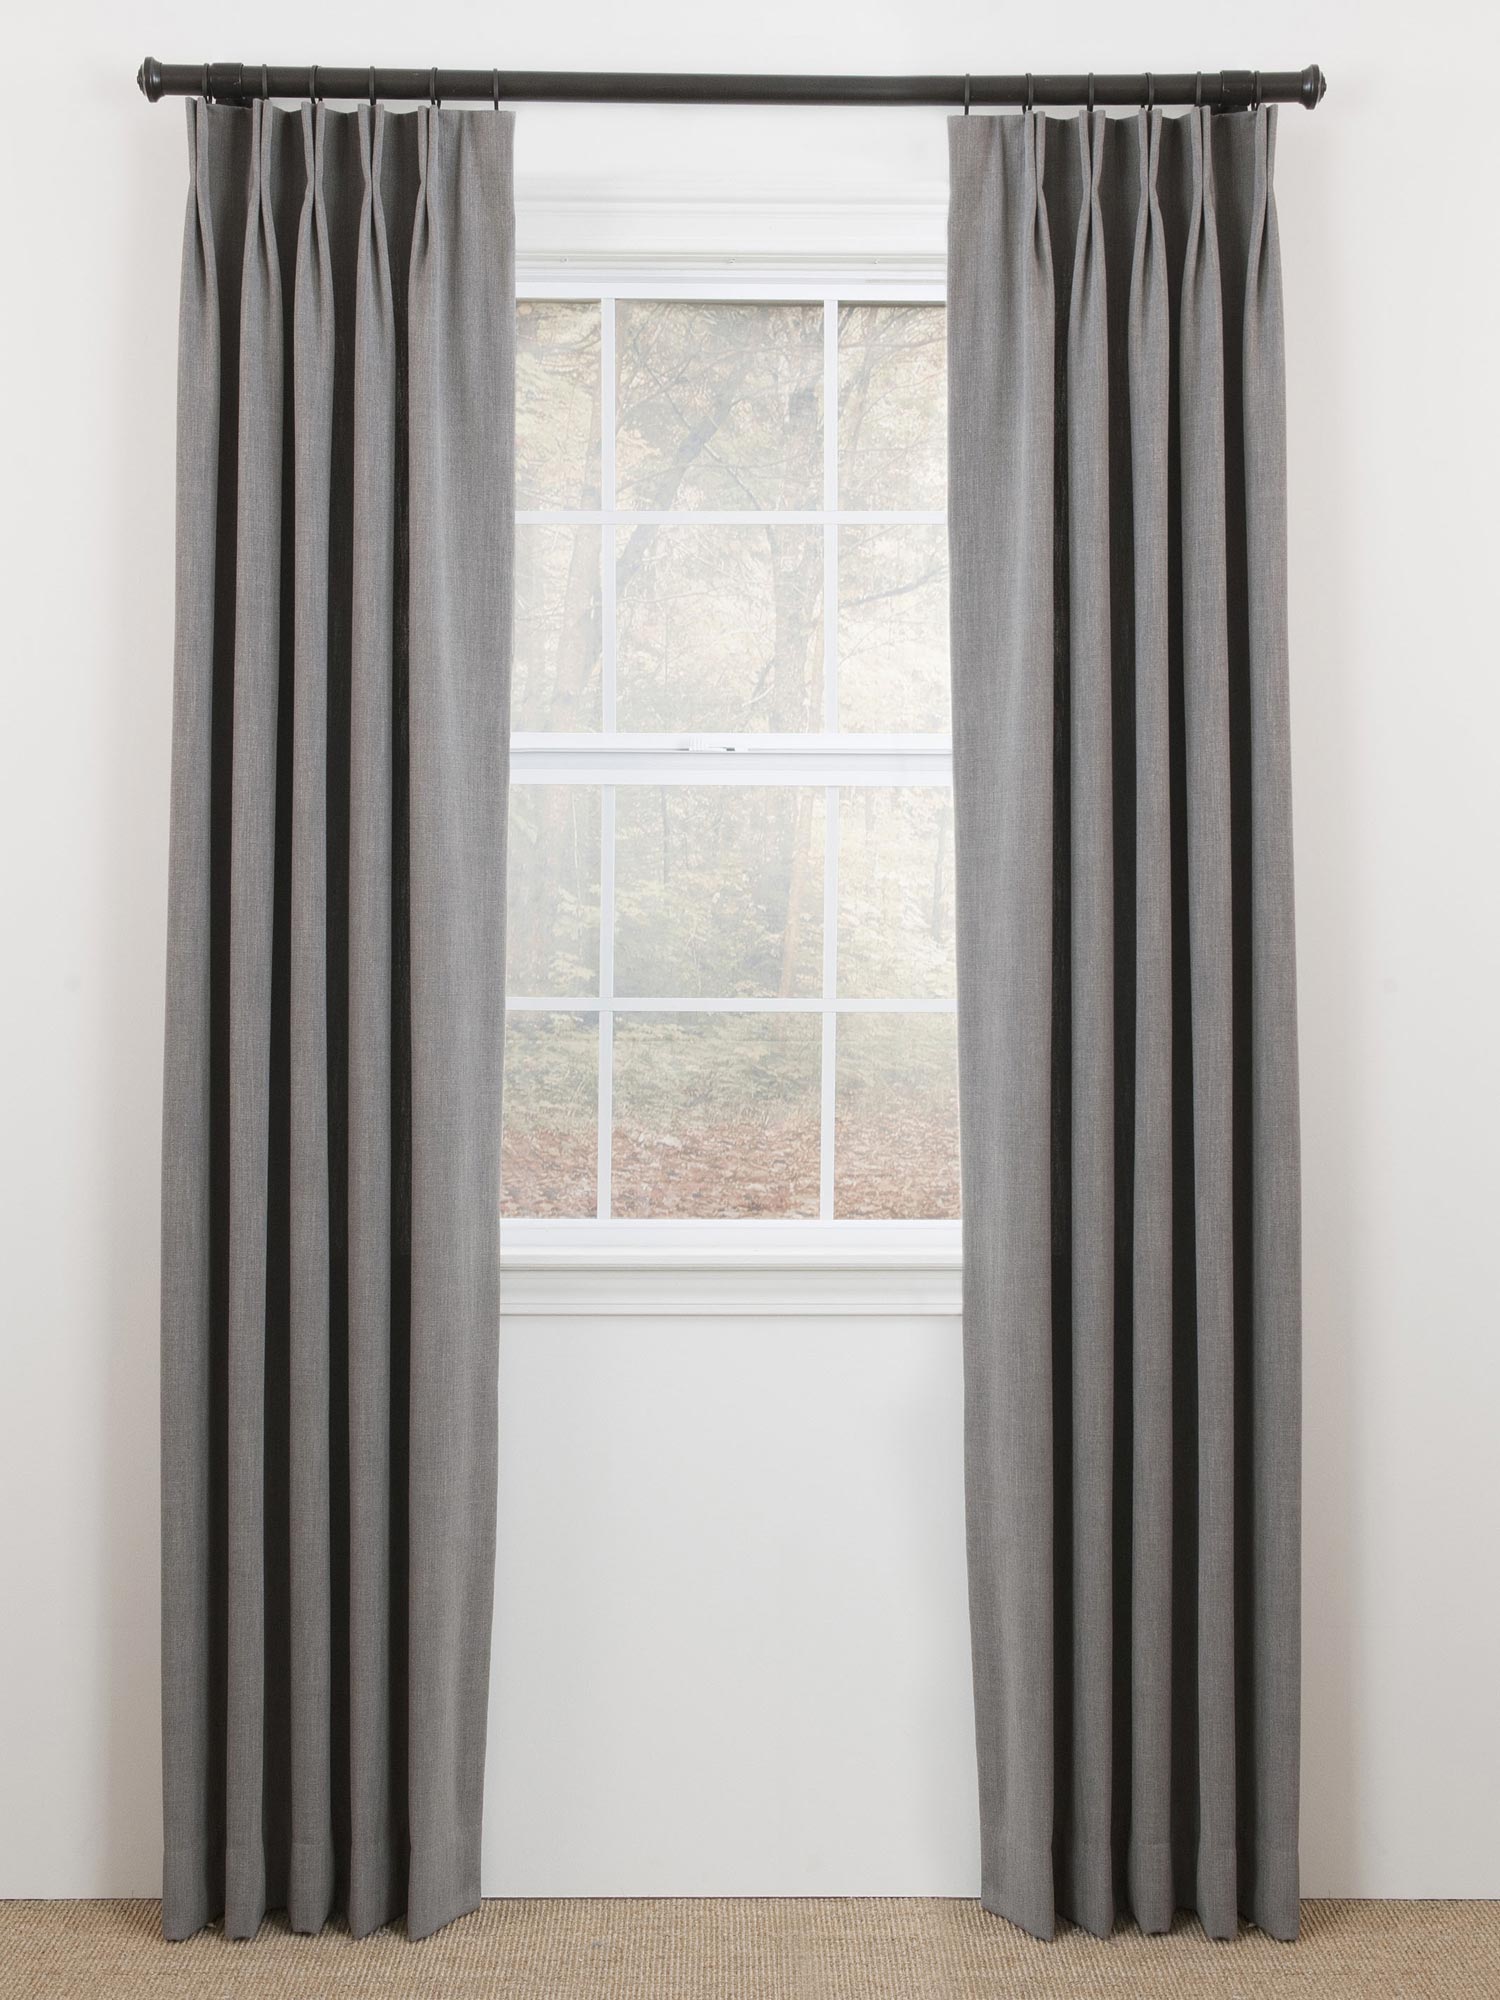 French Pleat Drapery Gray in Mission Viejo